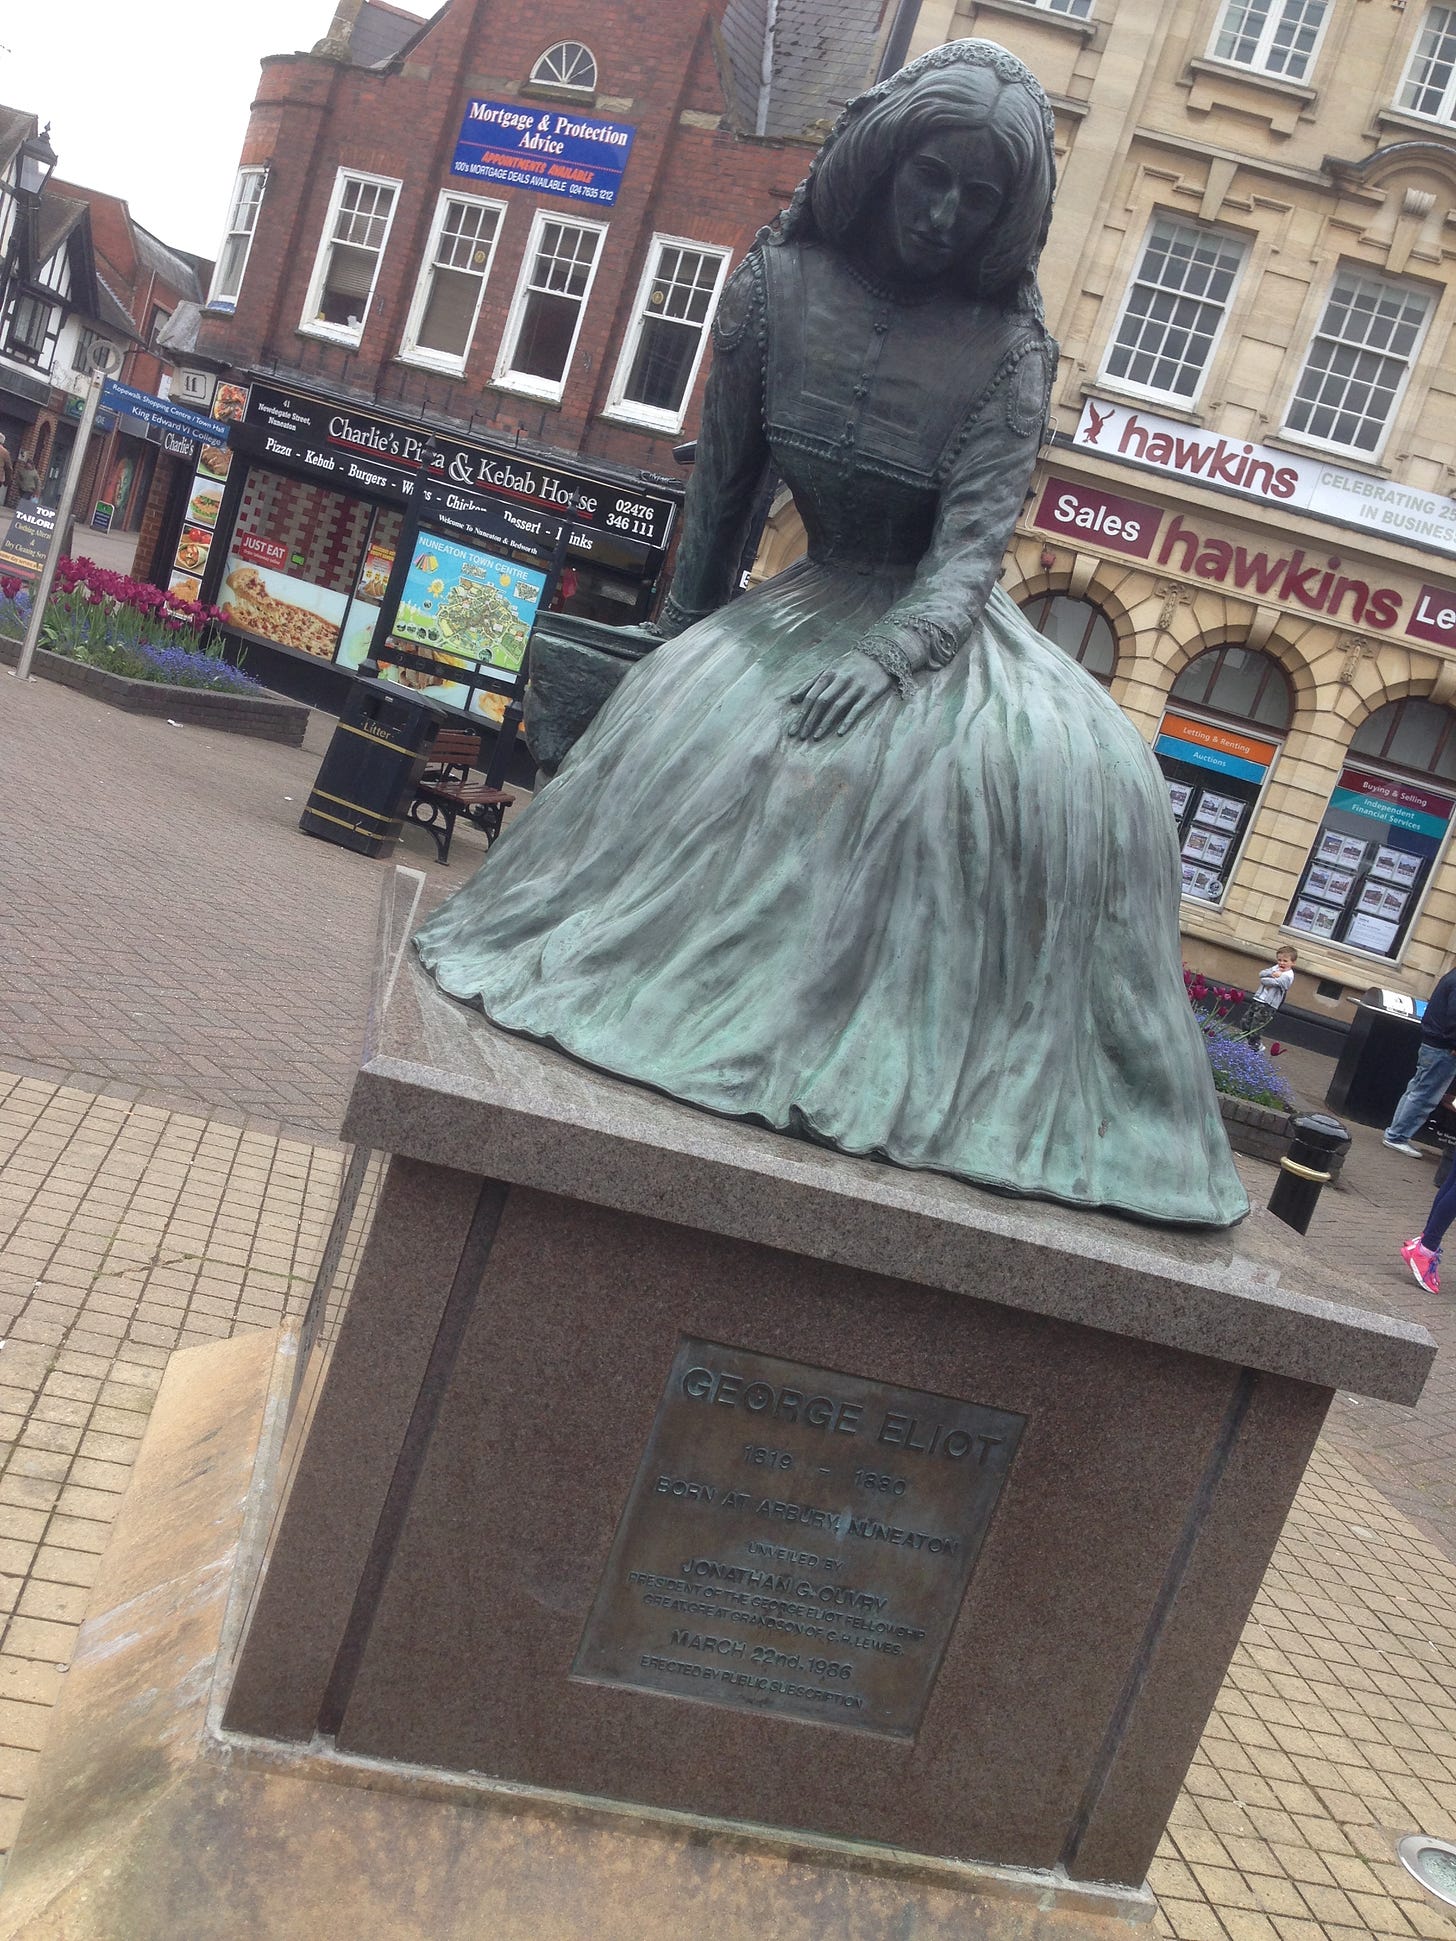 Image of statue of George Eliot in Nuneaton, England